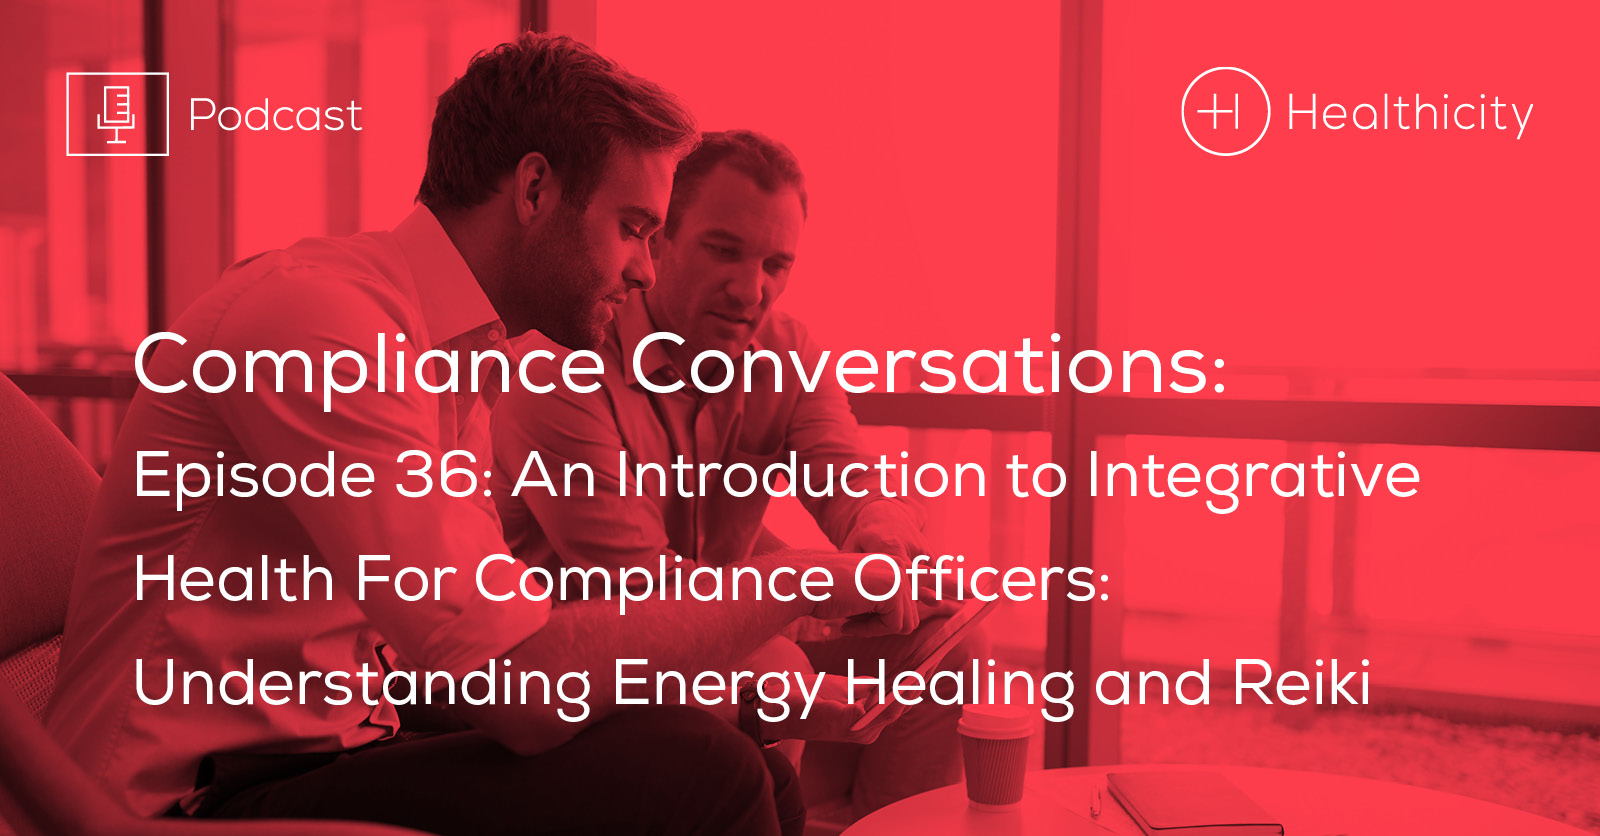 Listen to the Episode - An Introduction to Integrative Health For Compliance Officers: Understanding Energy Healing and Reiki